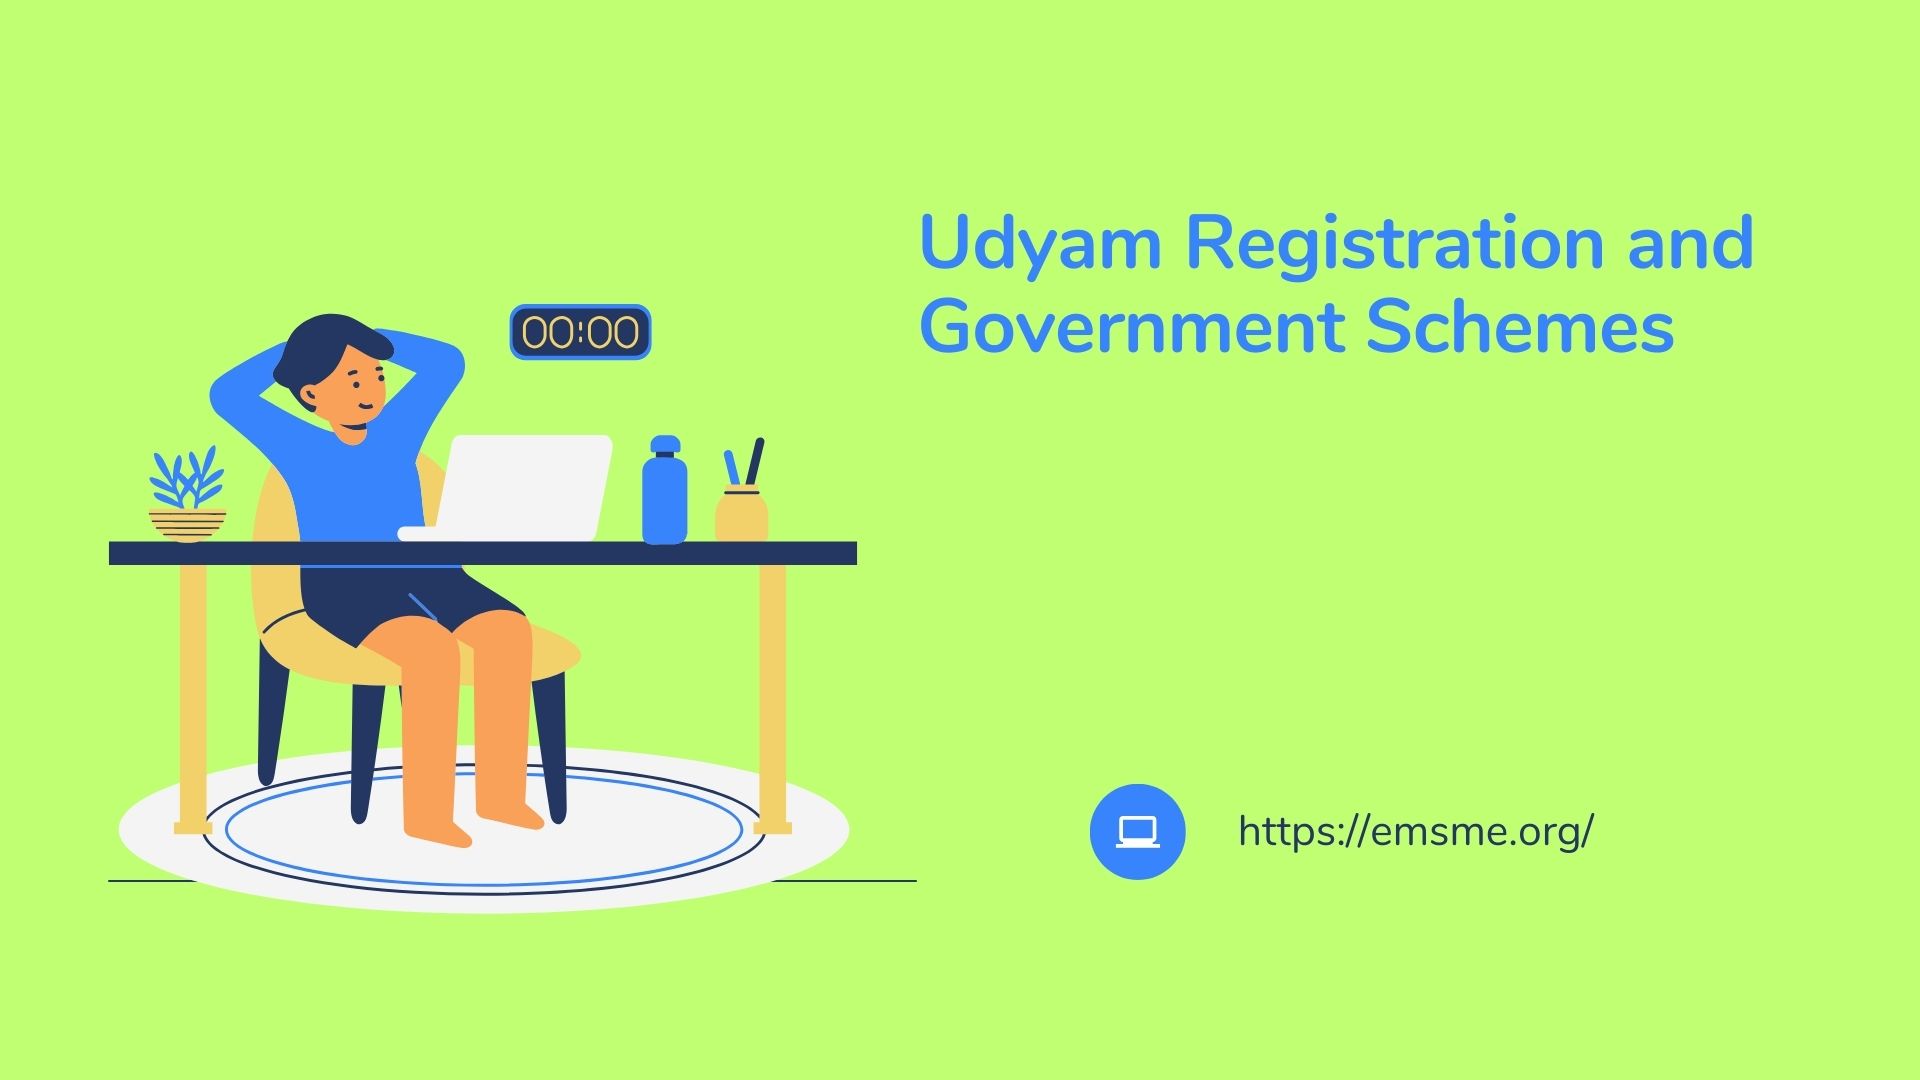 Udyam Registration and Government Schemes